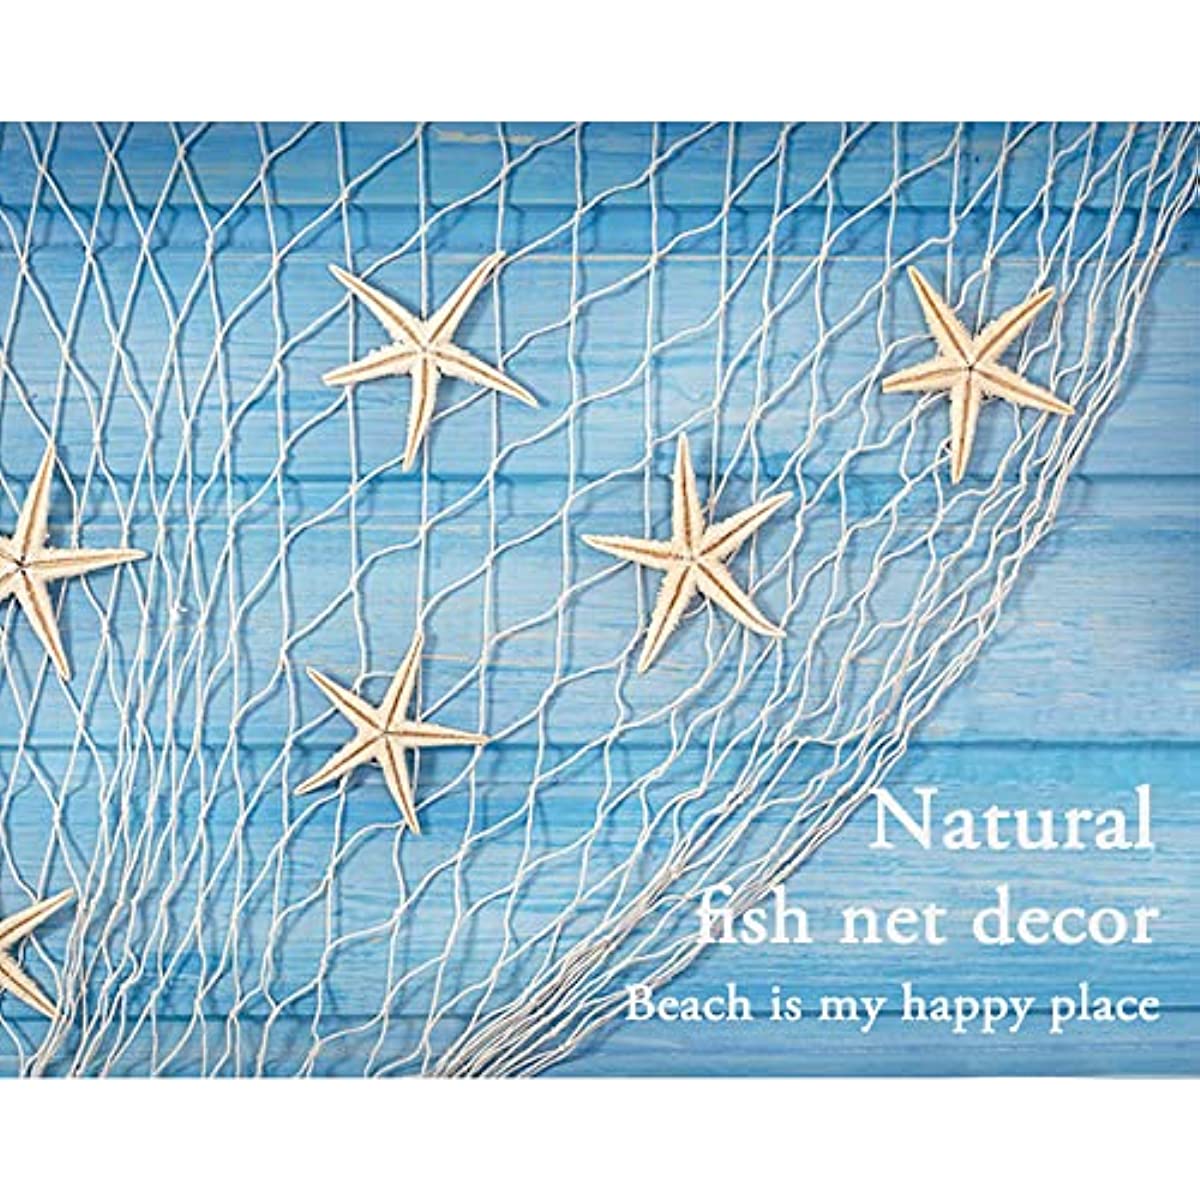 5ftx5ft Natural Cotton Decorative Fish Net With Ties, Rustic Beach